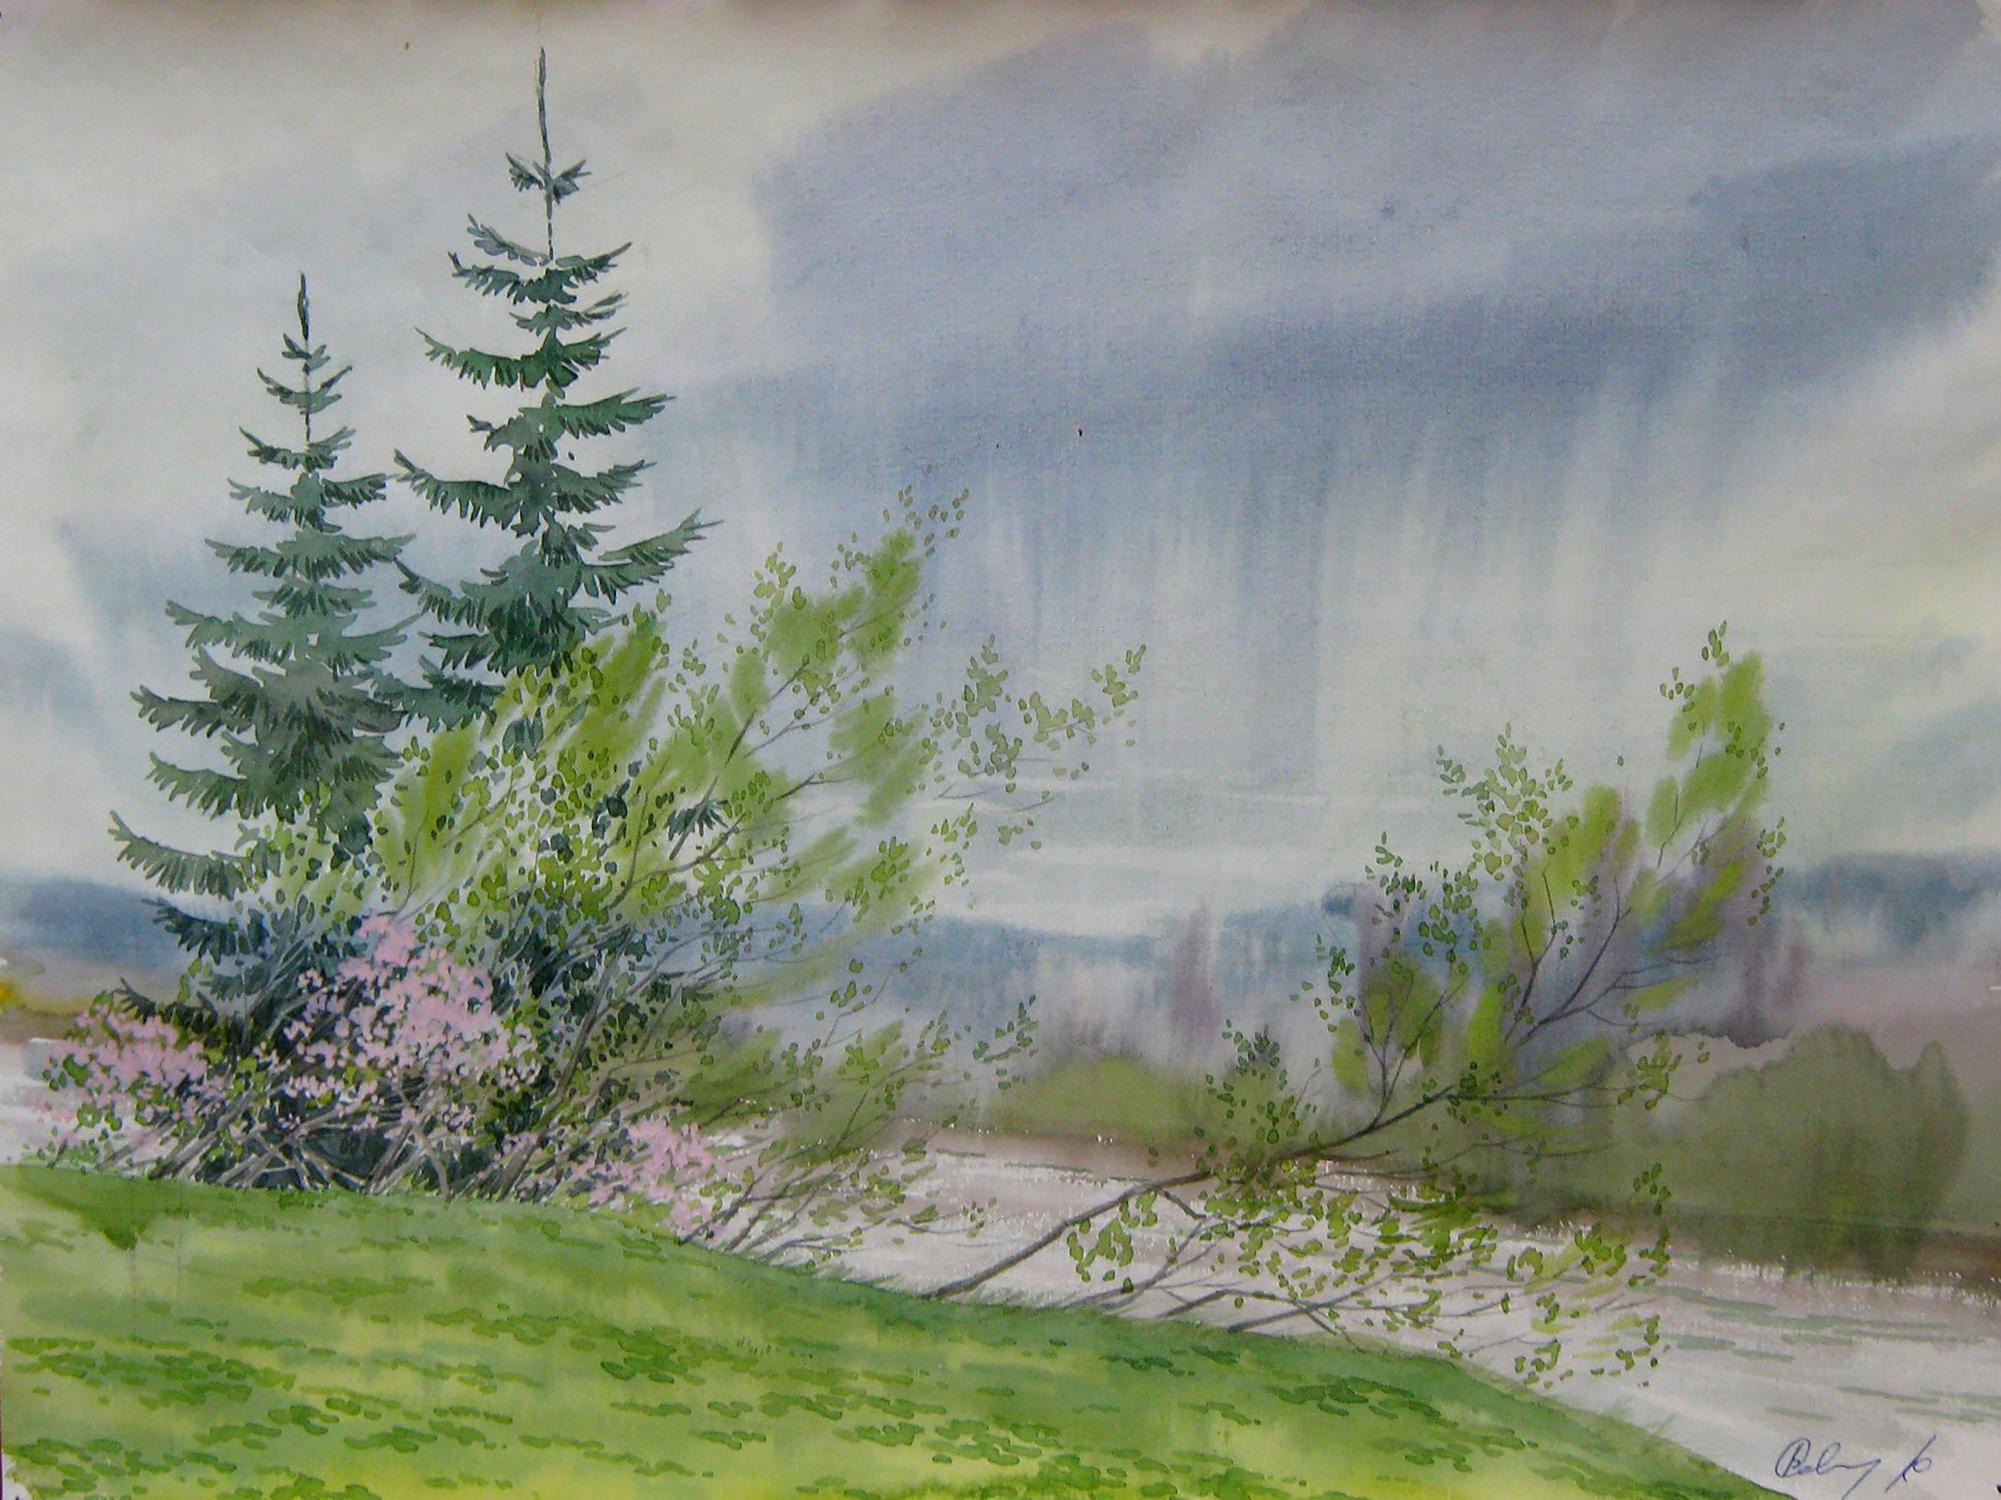 Gloomy Day by Valery Savenets, a watercolor painting capturing somber atmospheric tones.